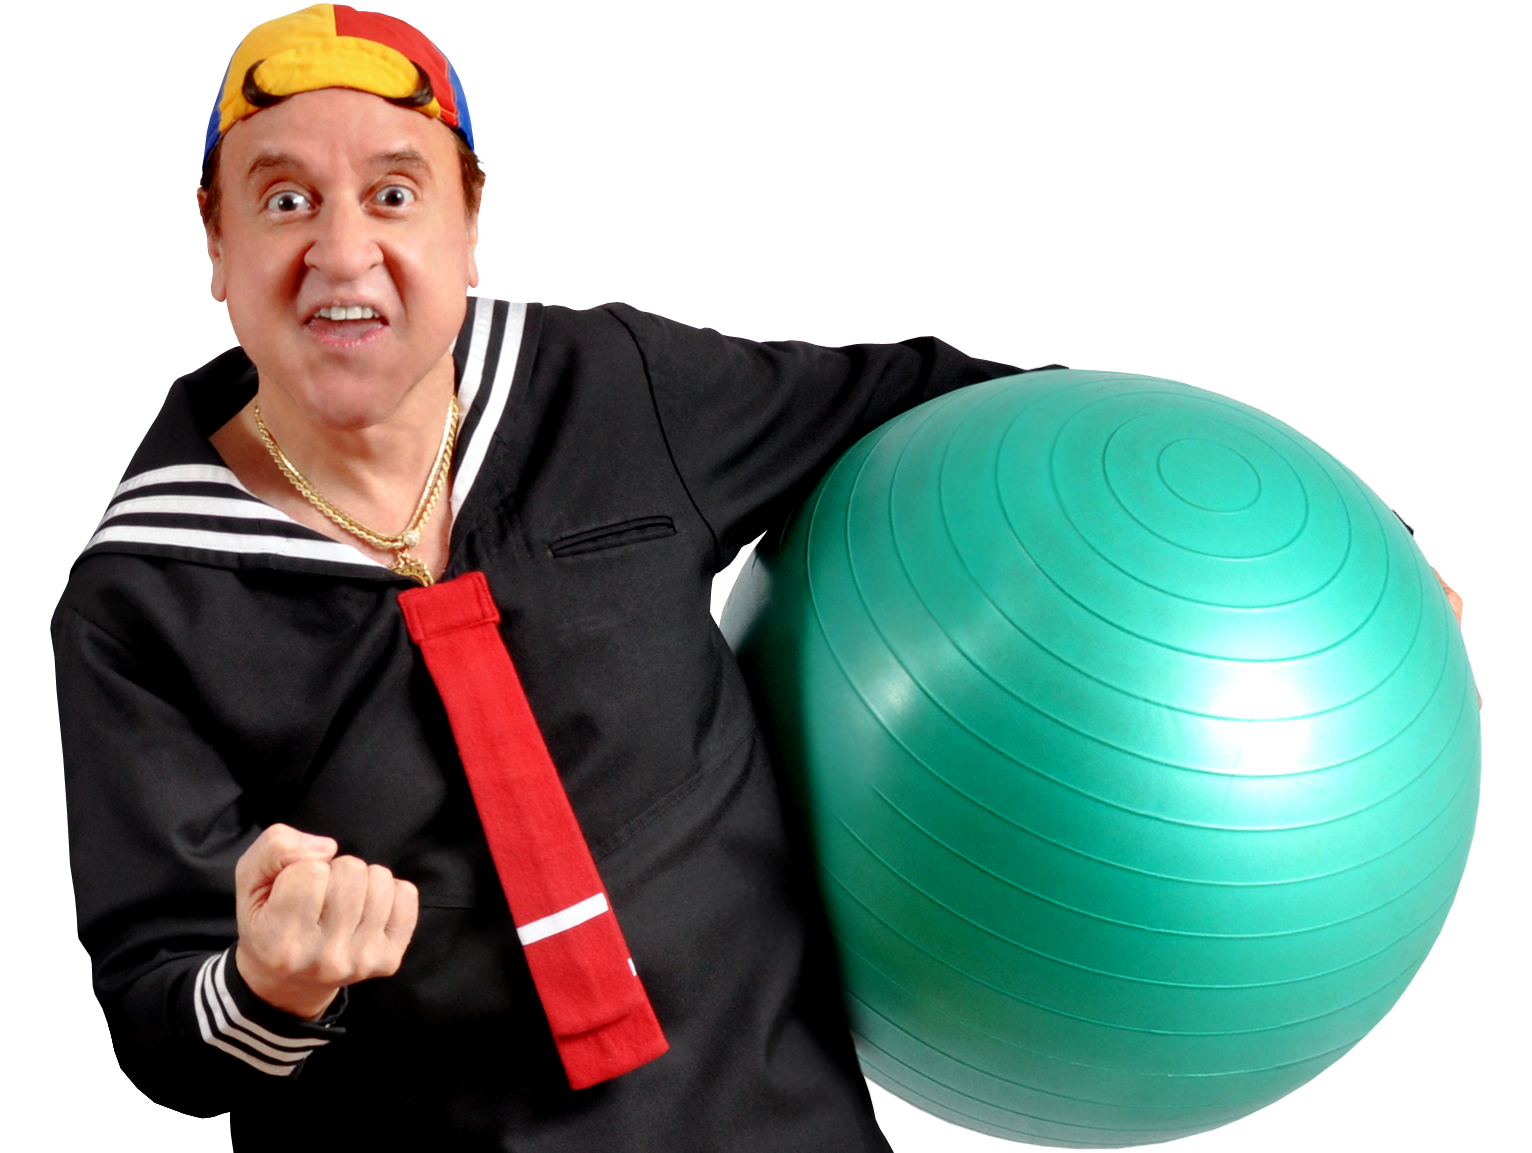 Turma do Chaves - Quico PNG, Chaves PNG , clase de llaves, Klasse von Schlüsseln, Chaves' gang